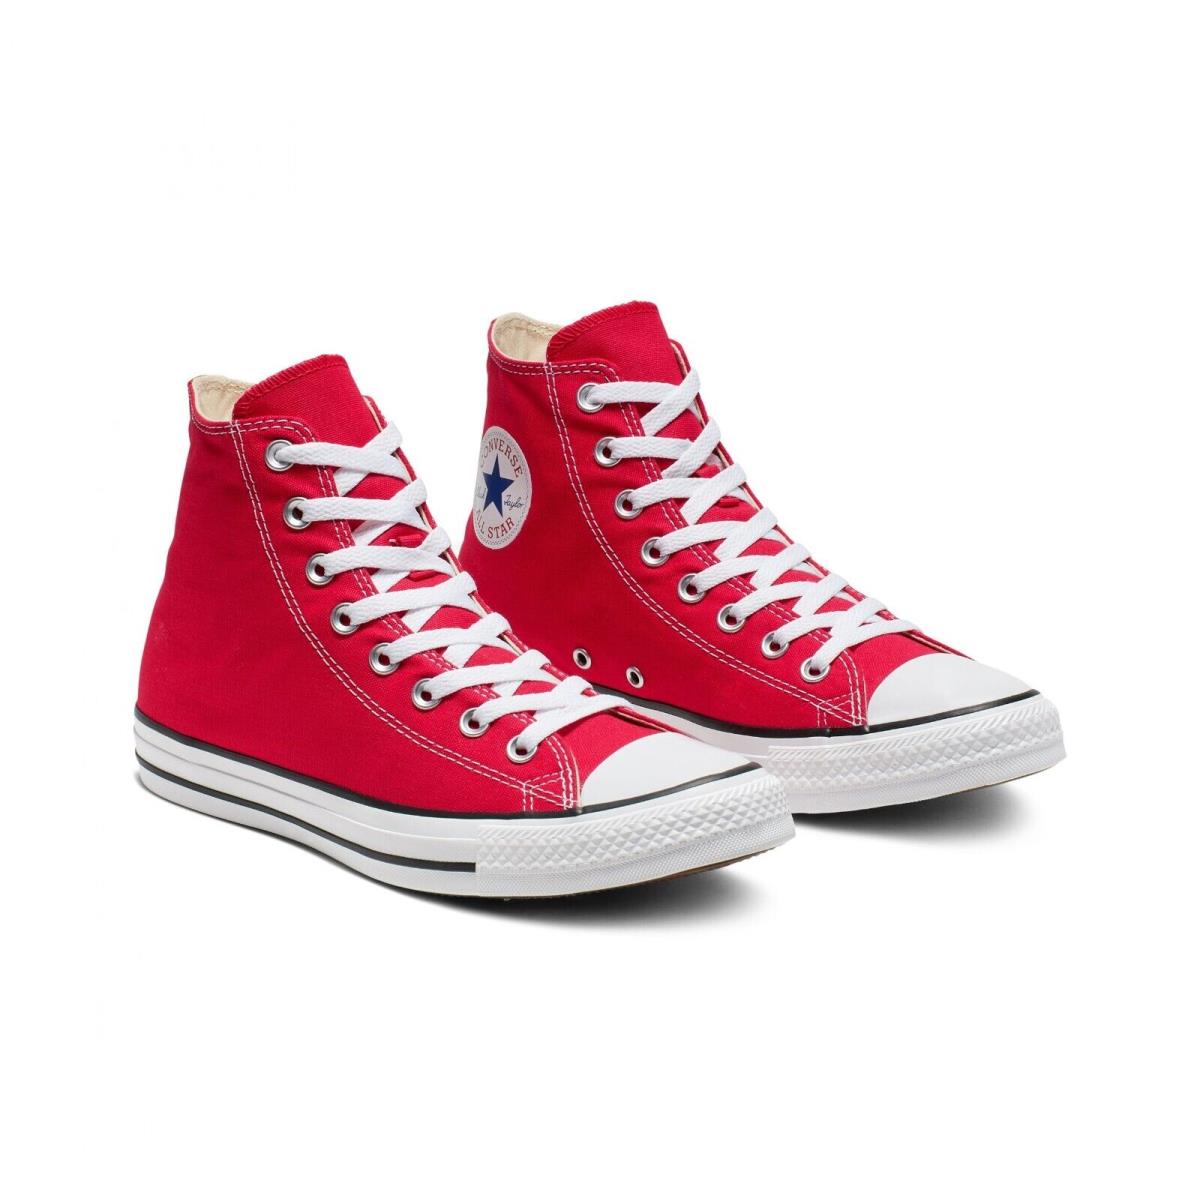 Converse Chuck Taylor All Star Hi M9621C Unisex Red Shoes Size M3.5 / W5.5 C419 - Red & White